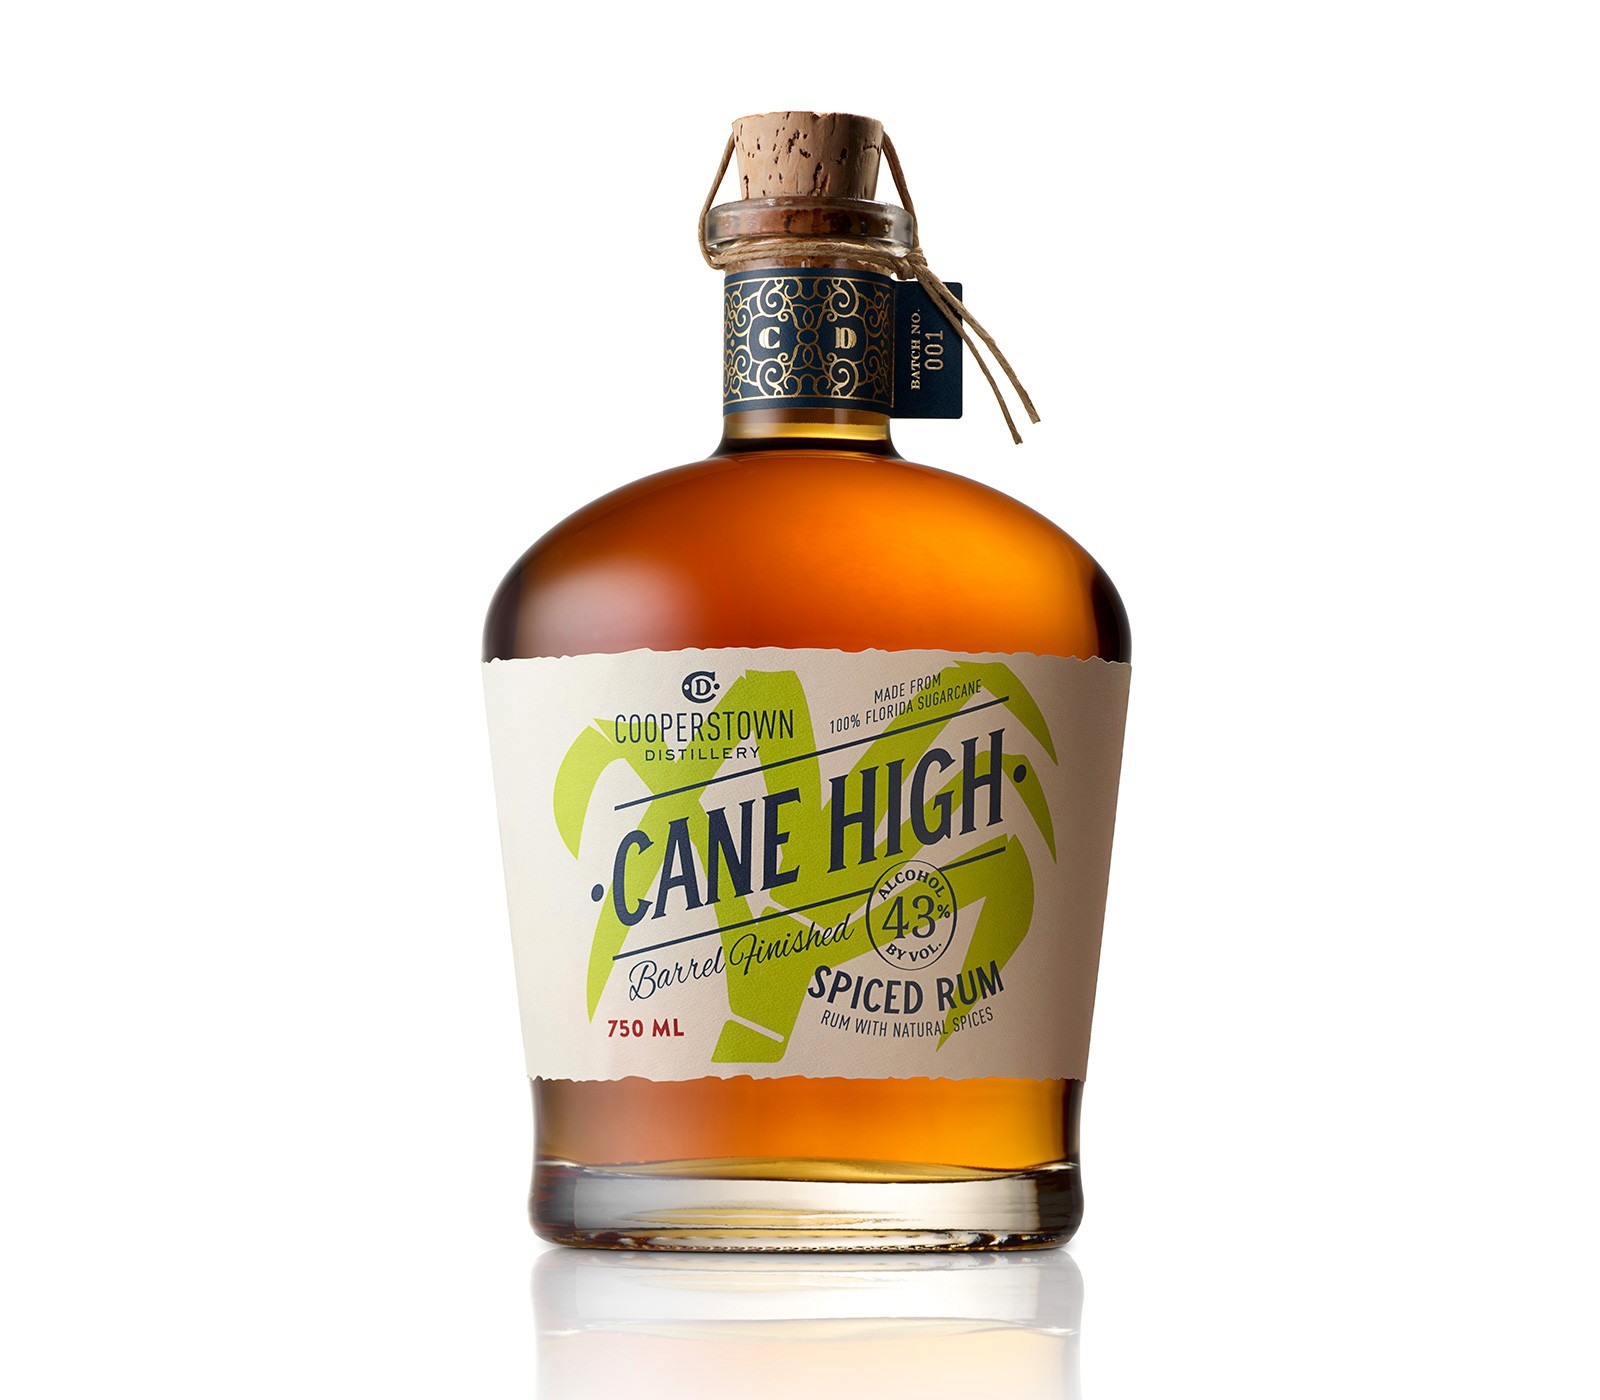 Vintage Inspired Cane High Rum Brand from Cooperstown Distillery